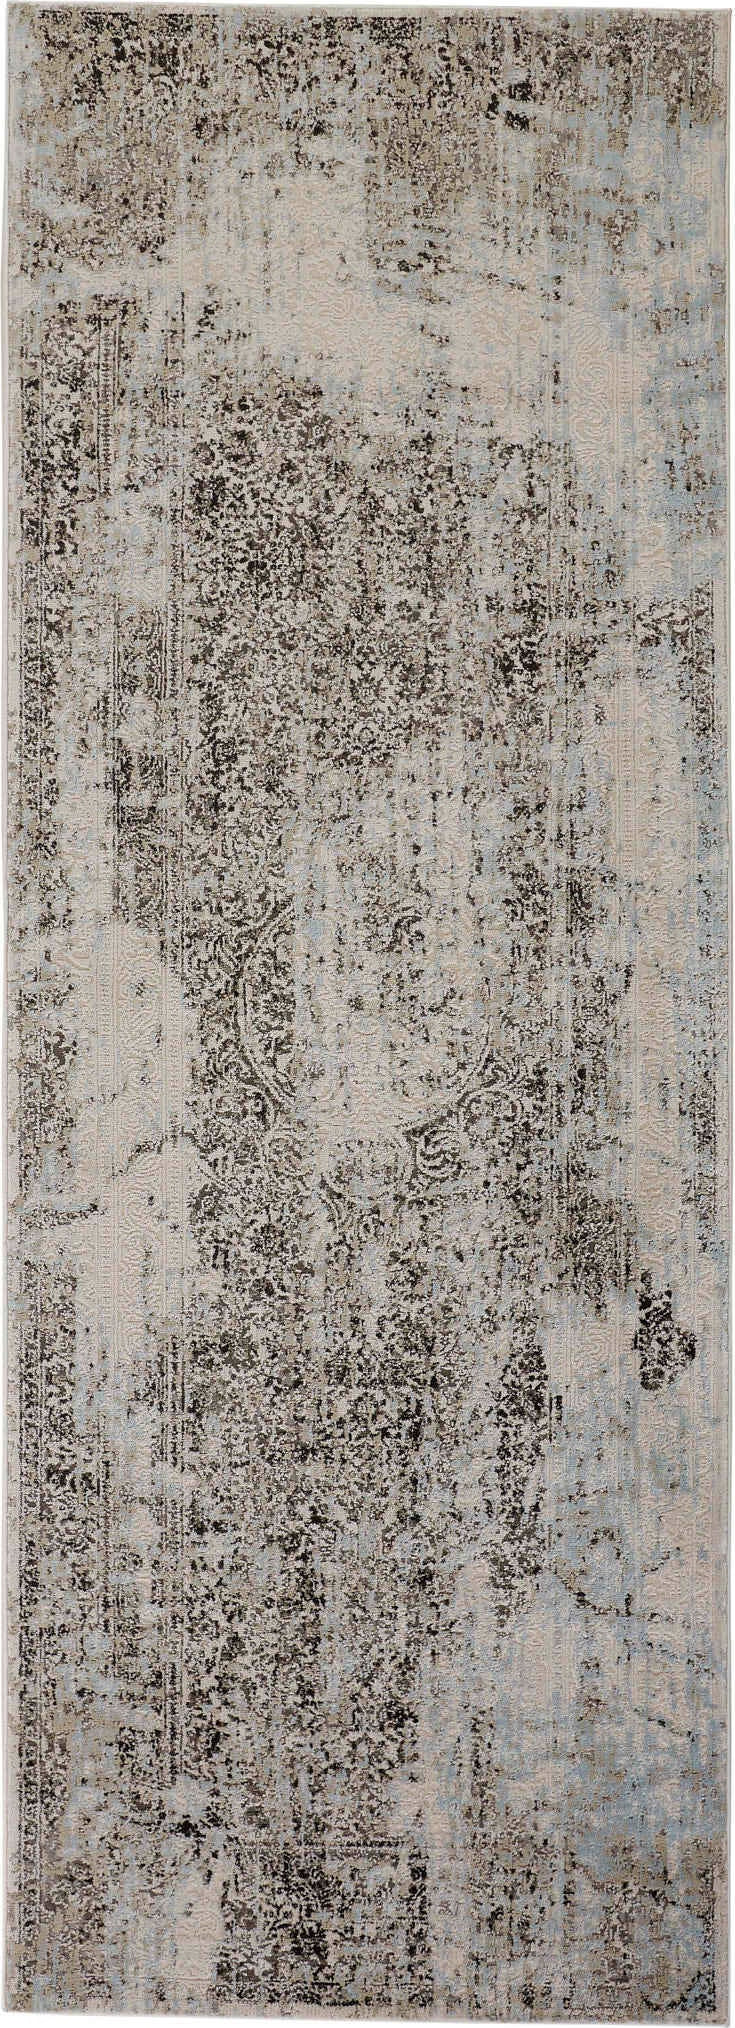 Feizy Prasad 39AEF Gray/Blue/Ivory Area Rug Lifestyle Image Feature